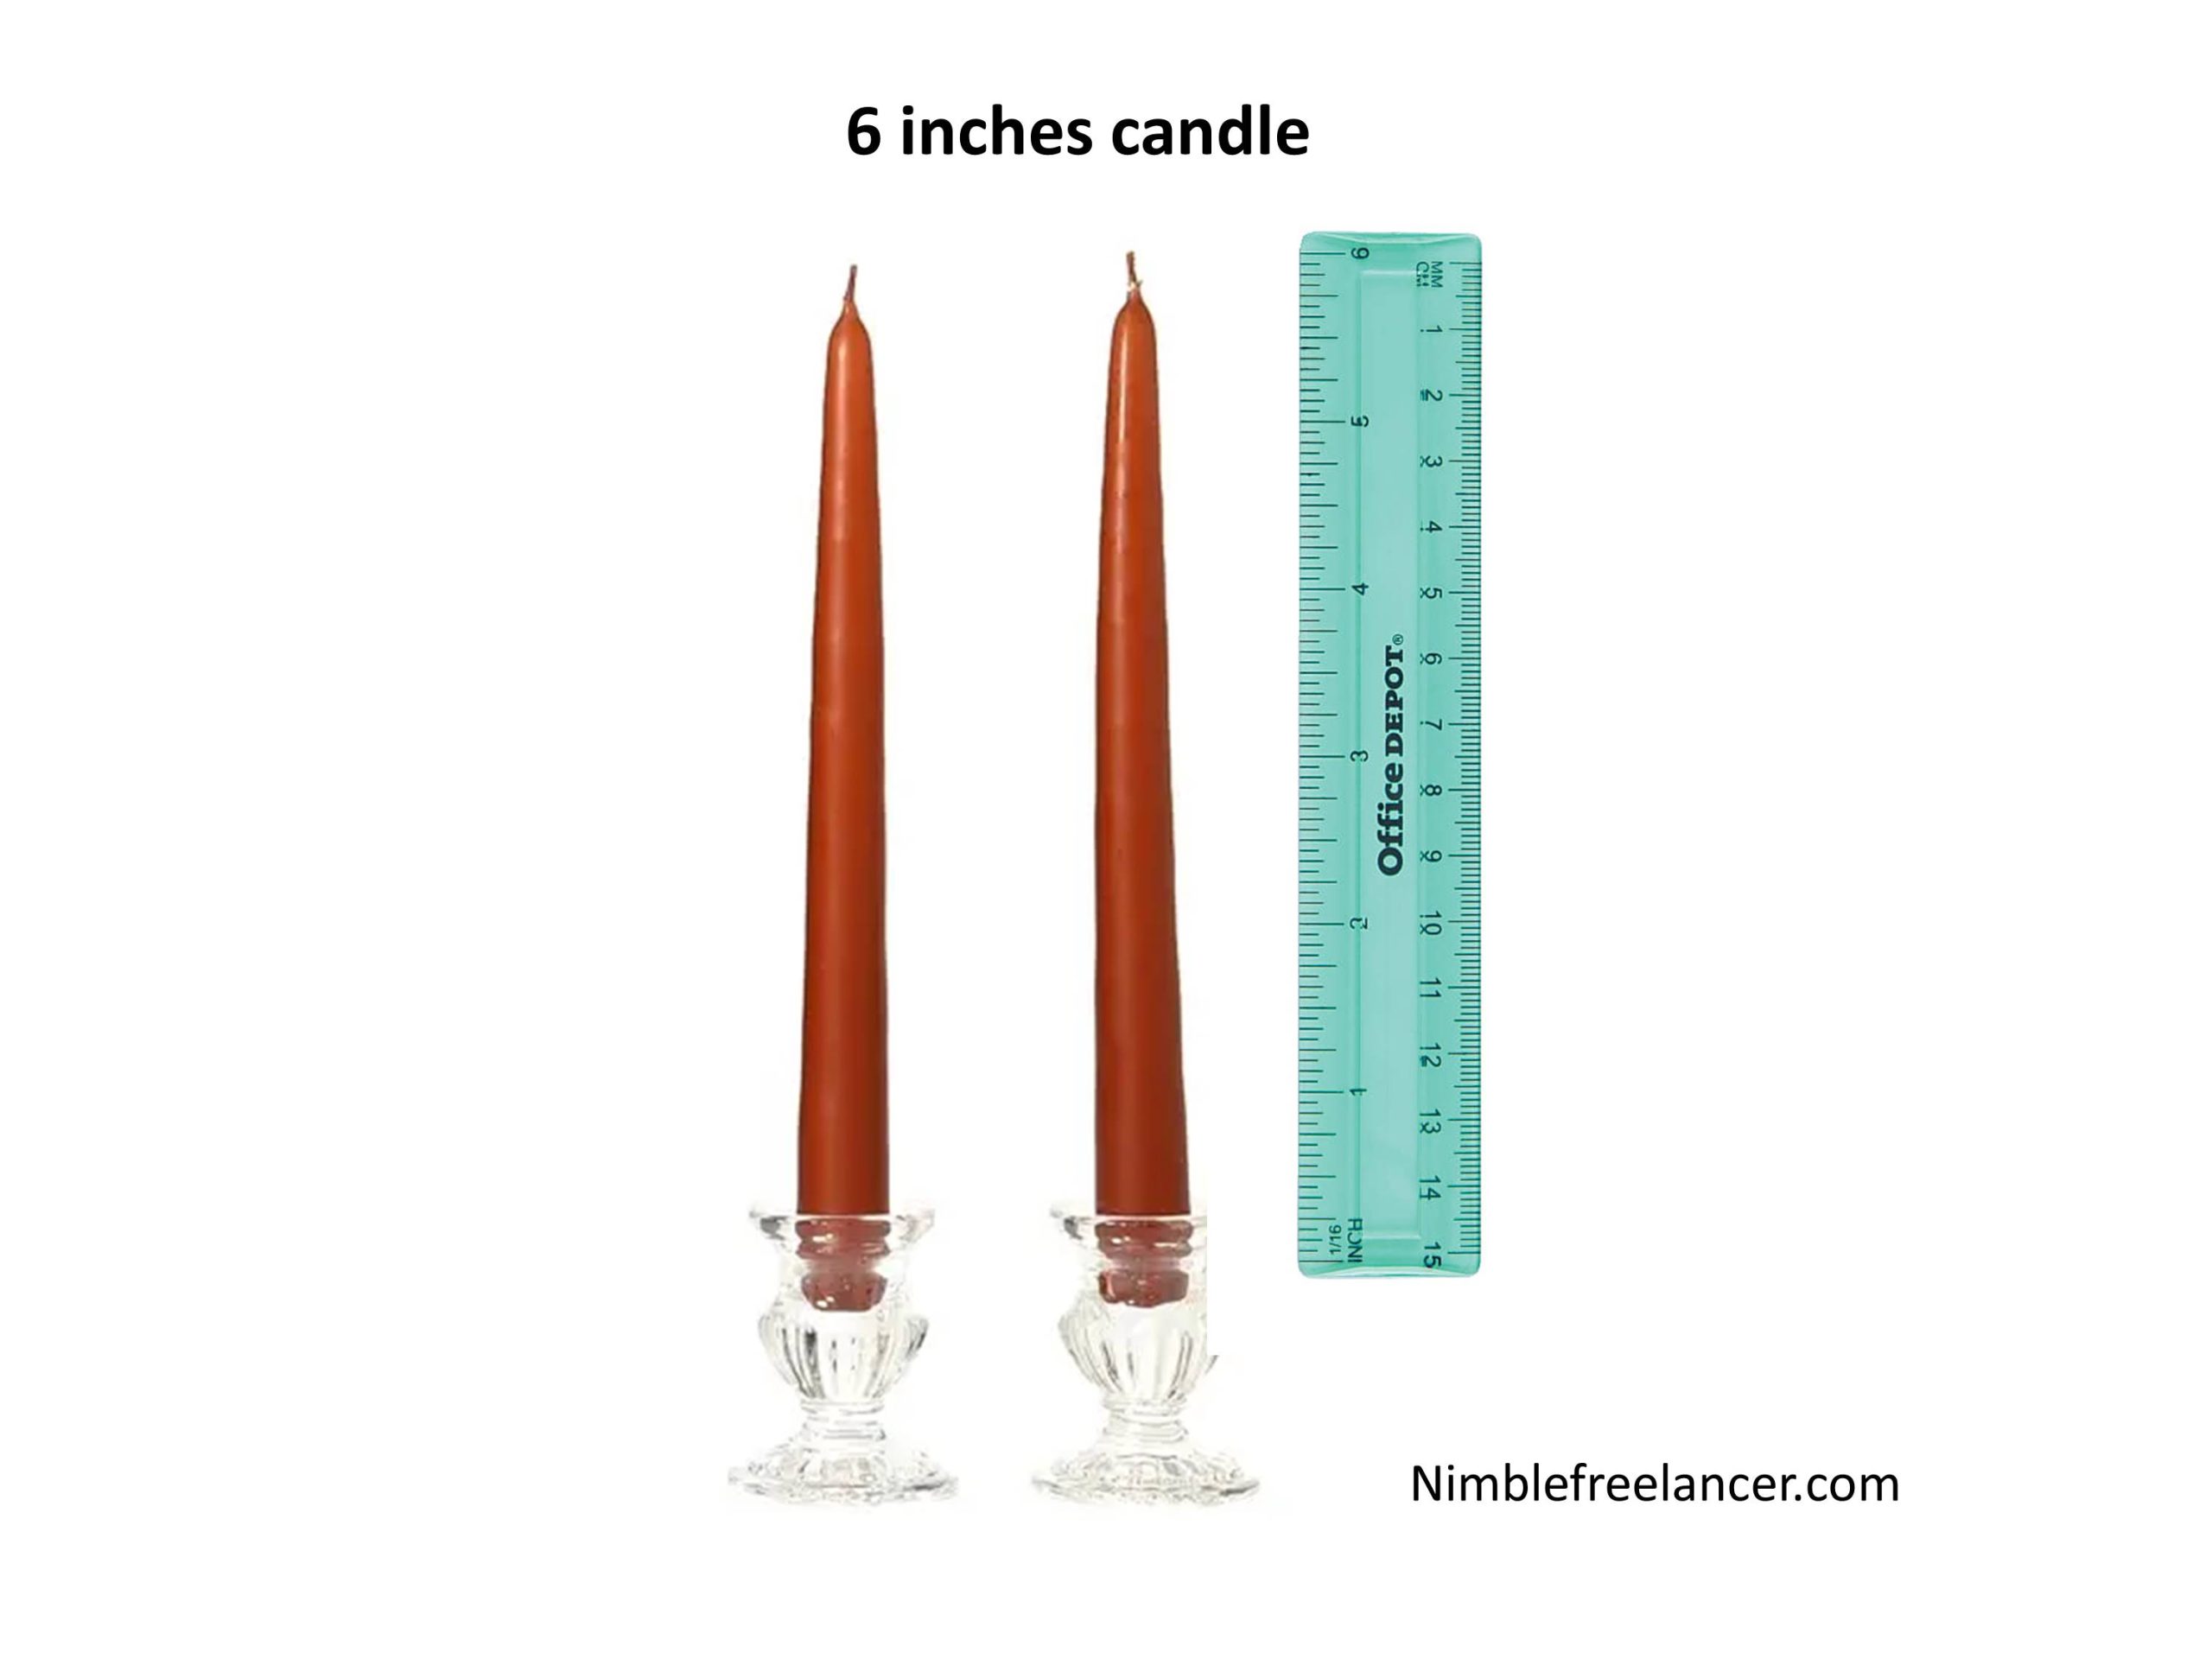 6 inches candle